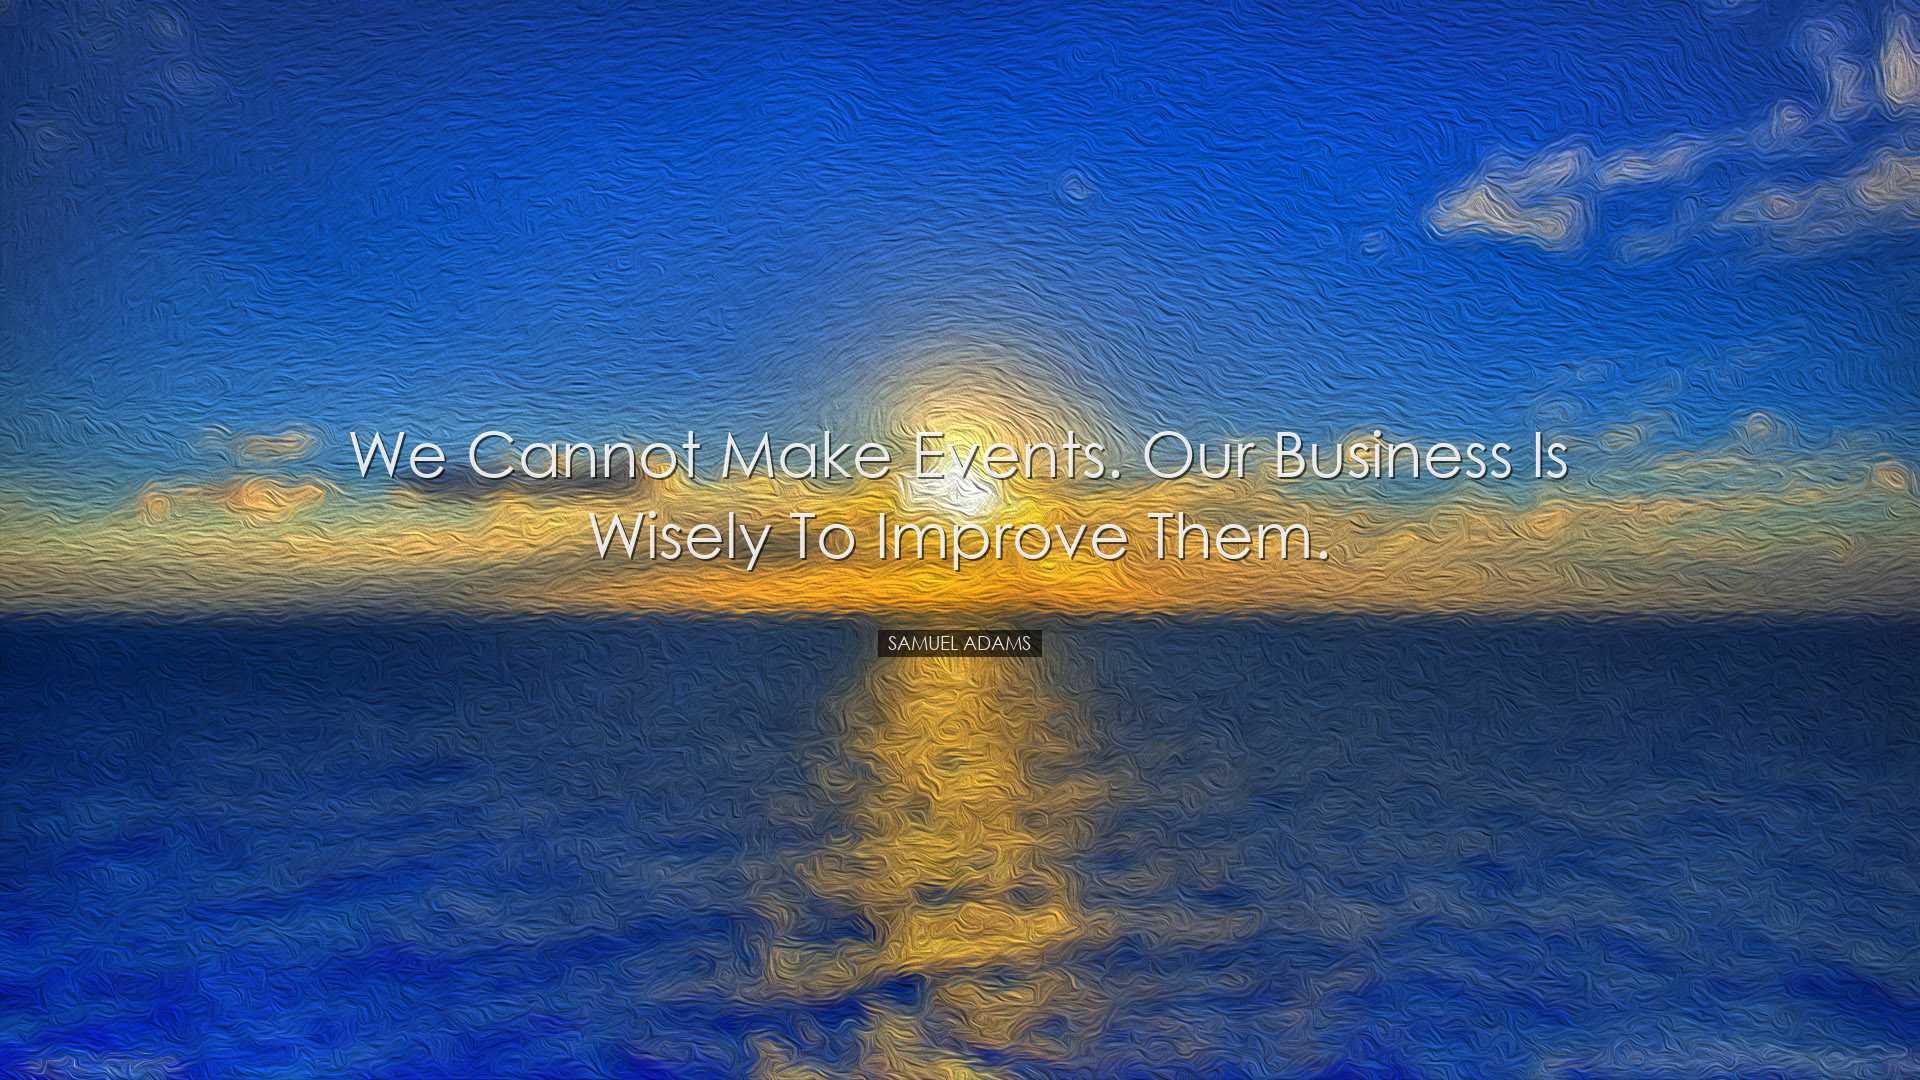 We cannot make events. Our business is wisely to improve them. - S